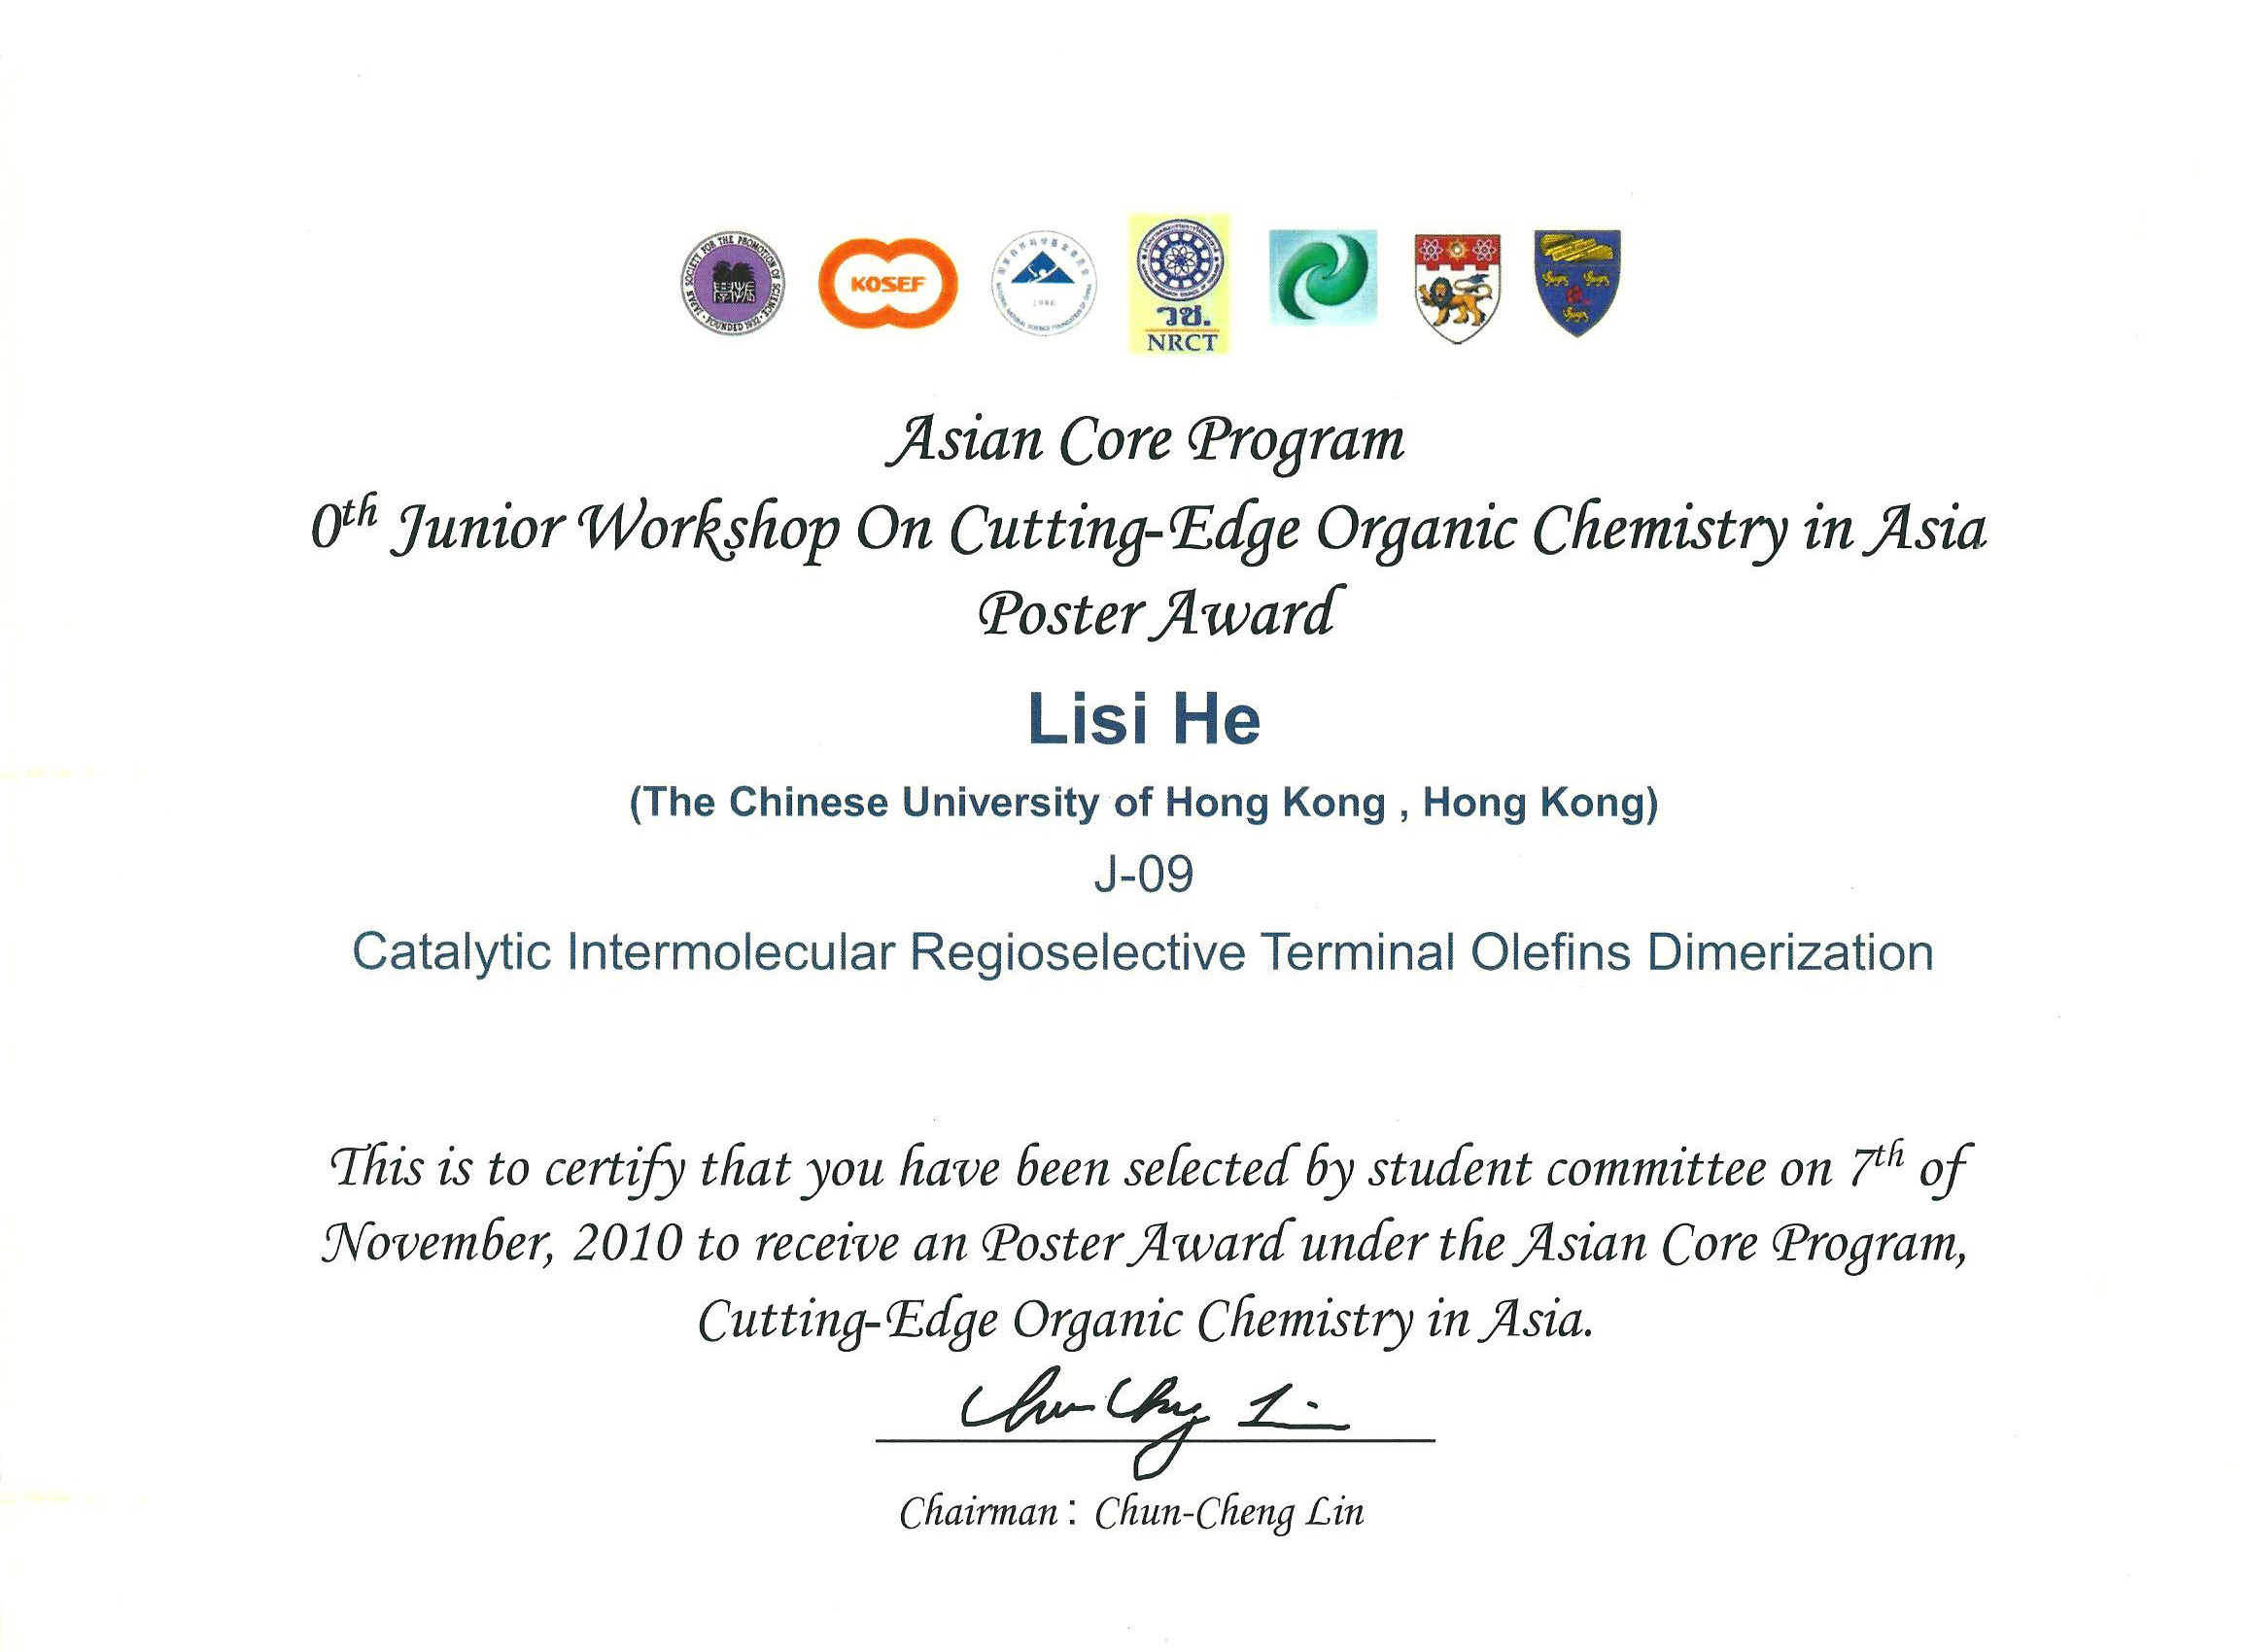 photo of the Poster Award at the Junior Workshop on Cutting-Edge Organic Chemistry in Asia